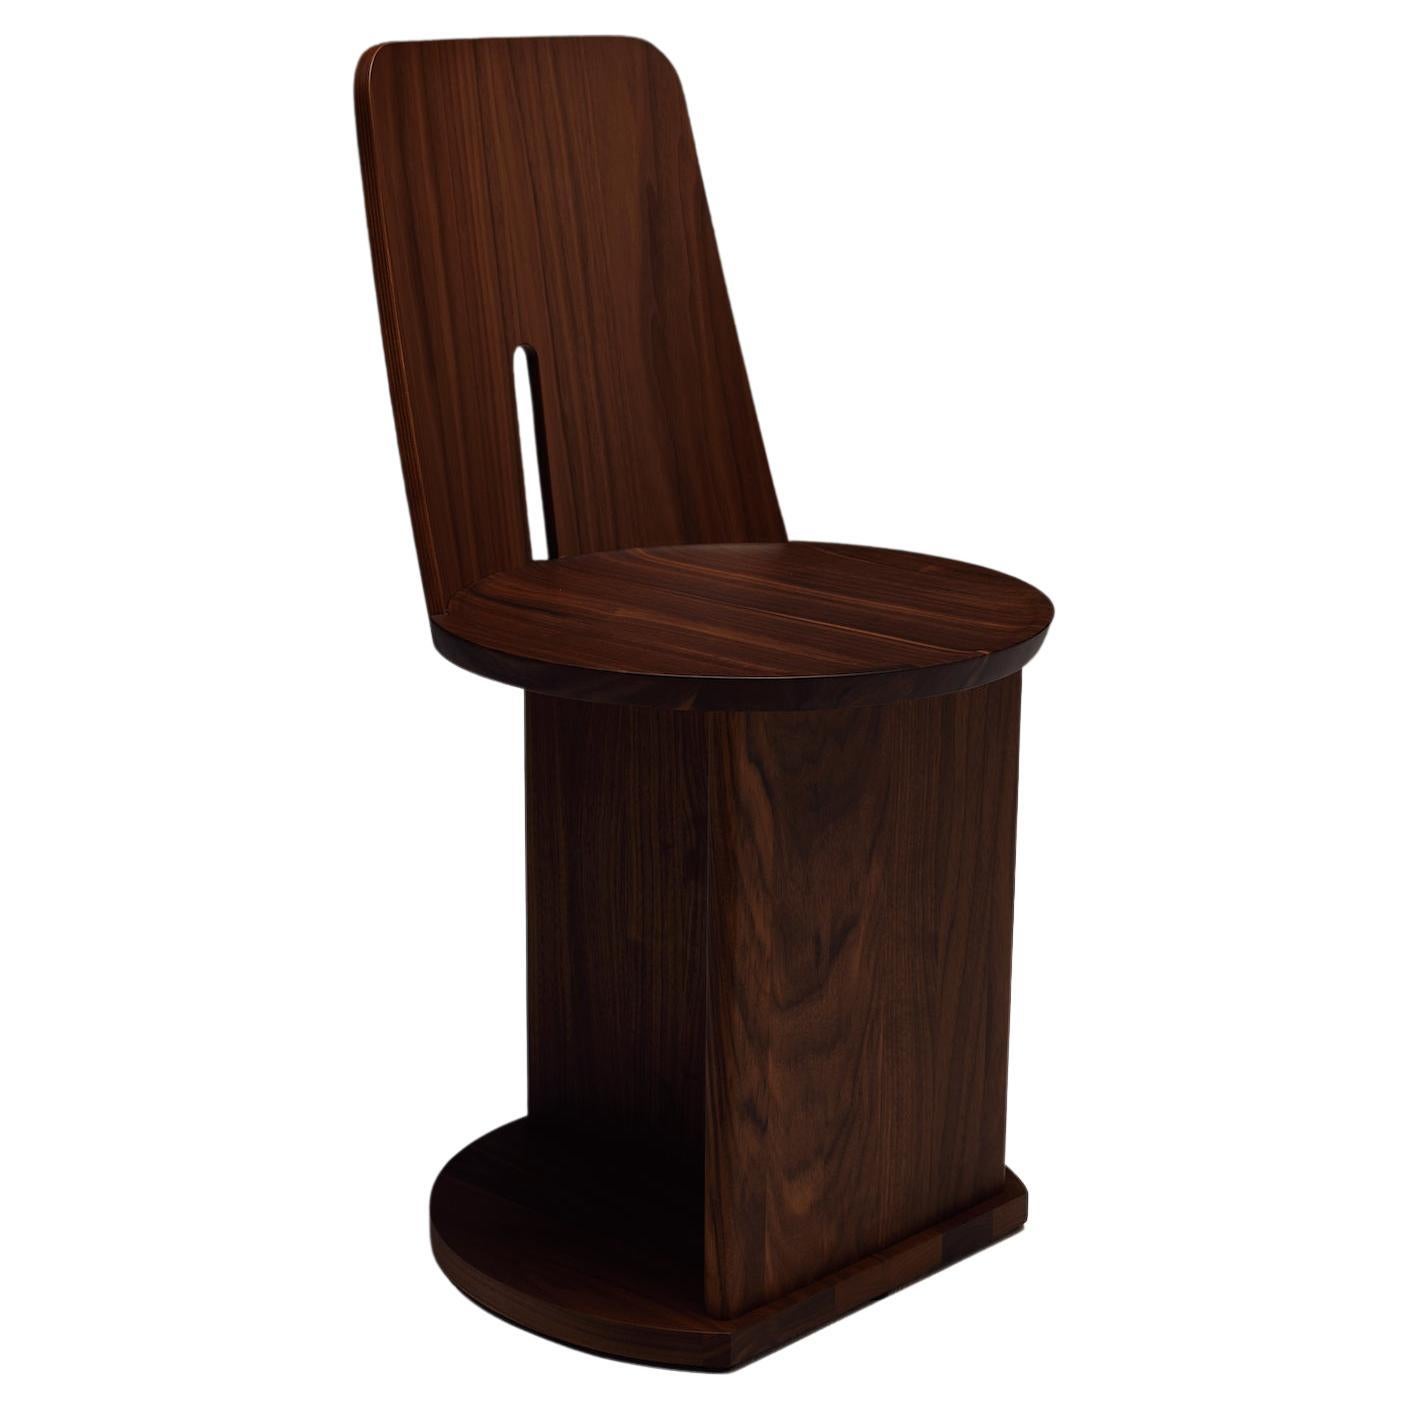 La Manufacture-Paris Intersection Canaletto Walnut Chair Designed by Neri & Hu For Sale